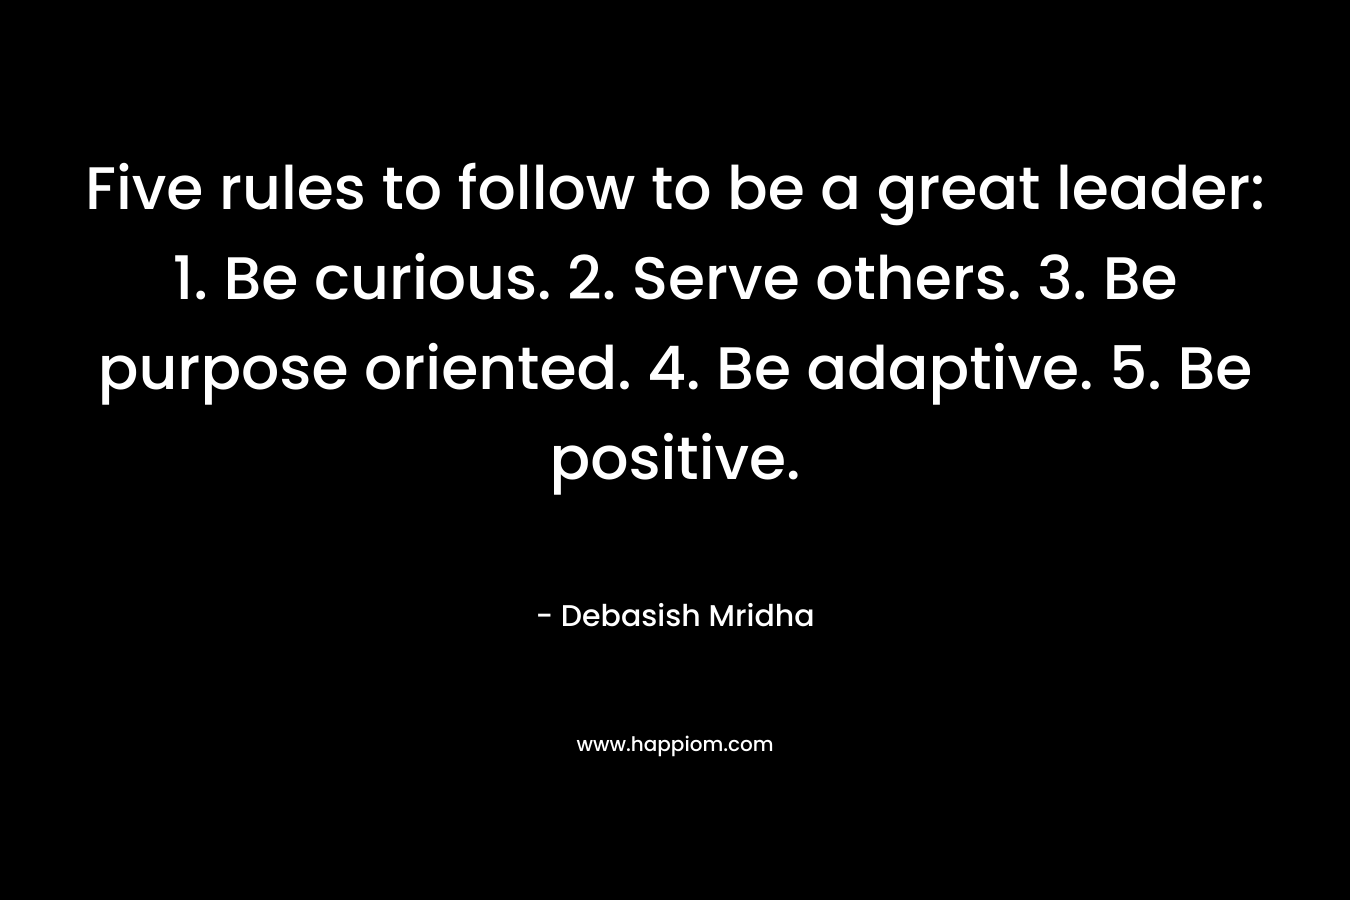 Five rules to follow to be a great leader: 1. Be curious. 2. Serve others. 3. Be purpose oriented. 4. Be adaptive.  5. Be positive.